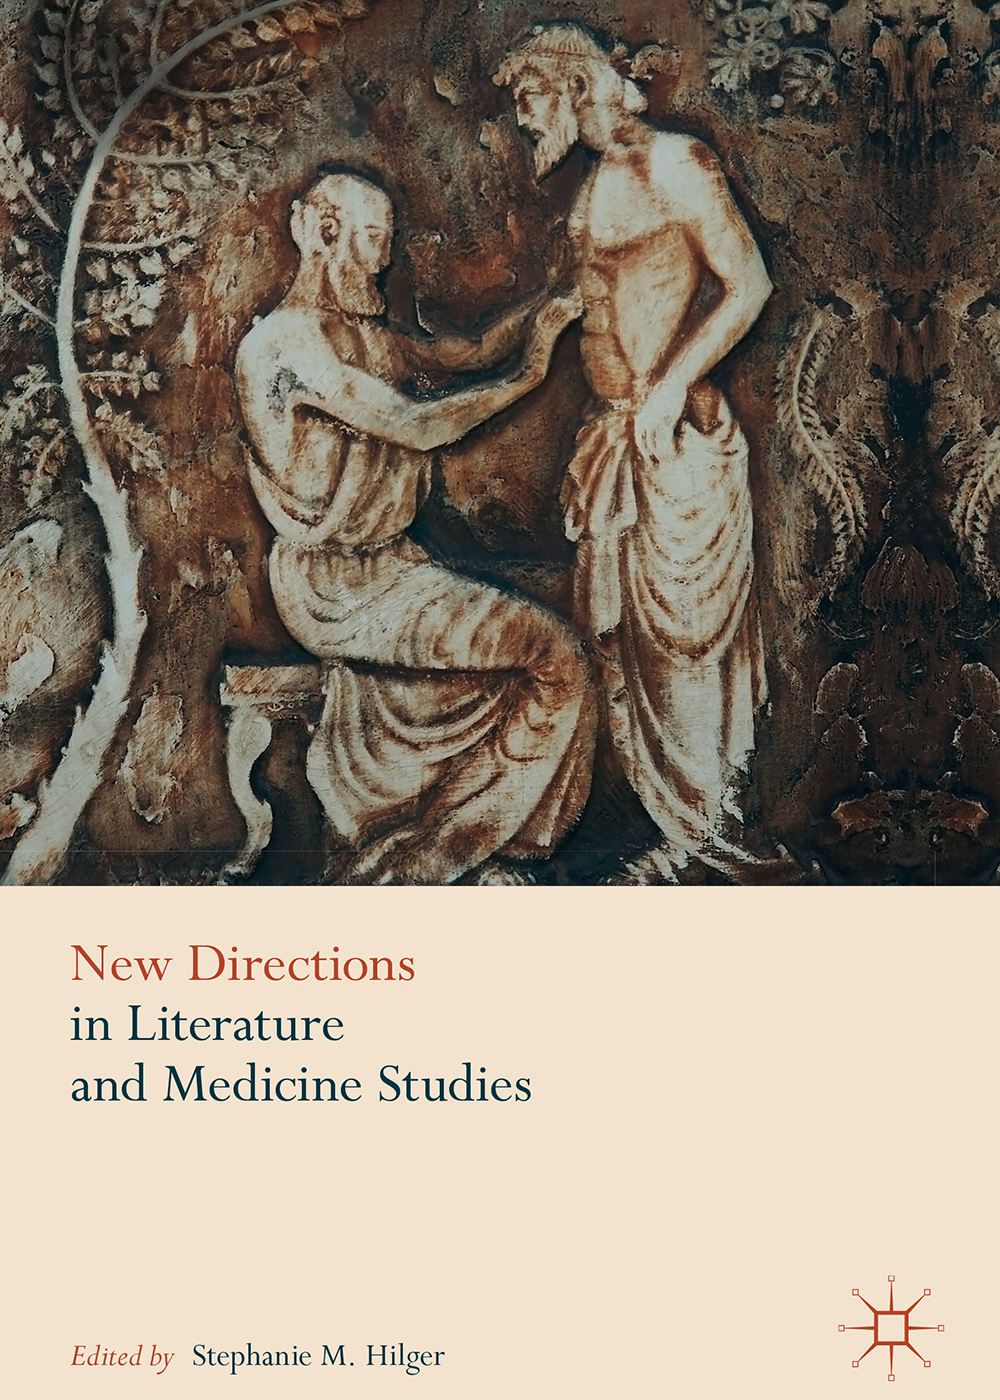 Stephanie Hilger’s edited book, “New Directions in Literature and Medicine Studies.” (Image courtesy of Stephanie Hilger and Palgrave MacMillan.) 